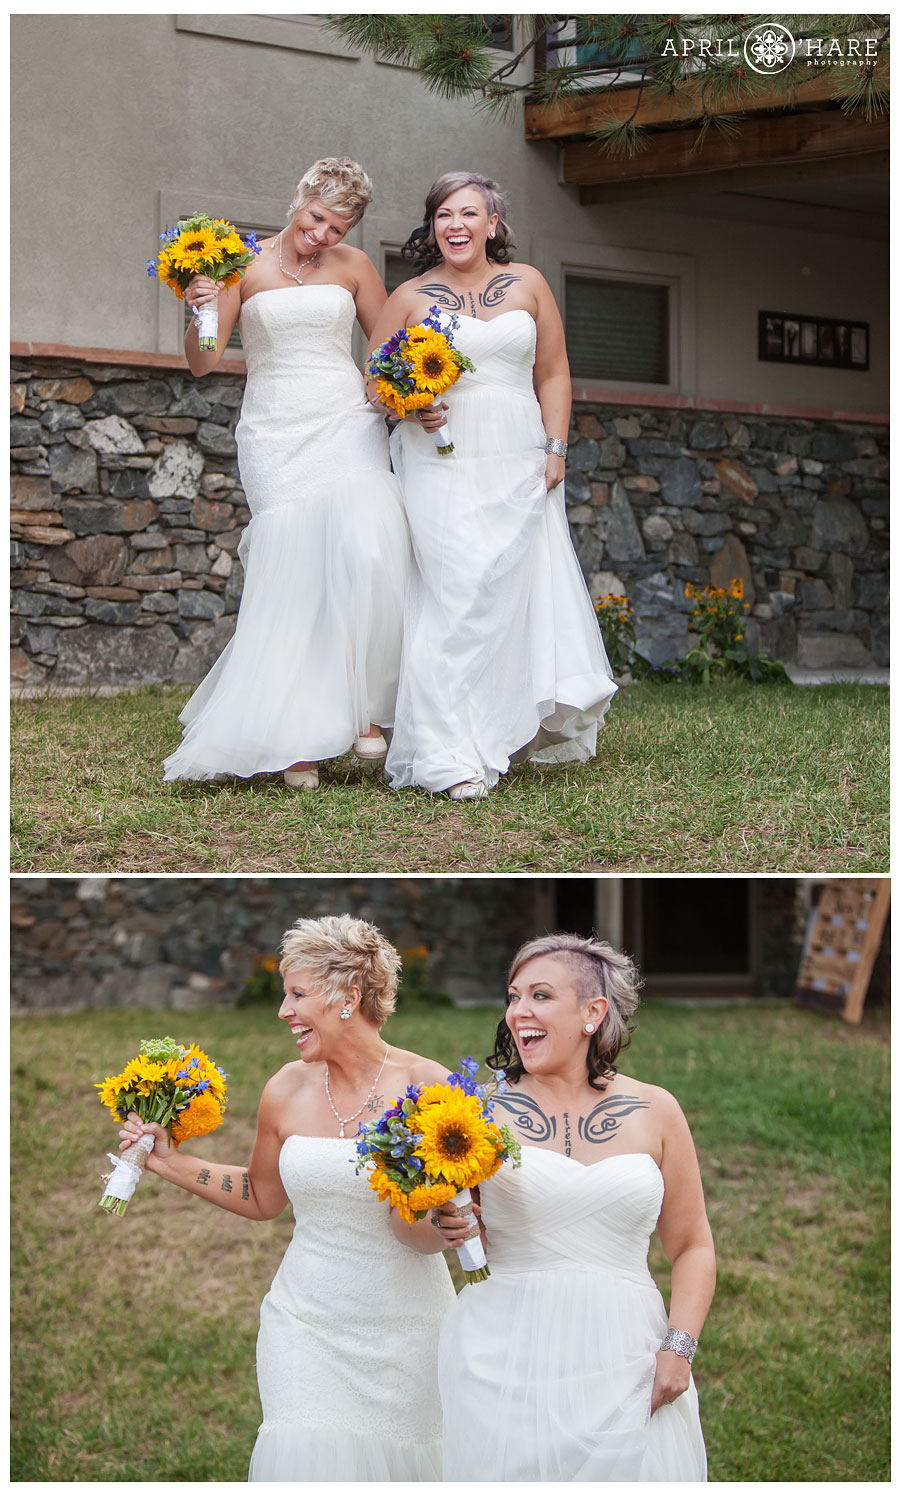 Two brides with sunflowers having fun at their Backyard Lesbian Wedding